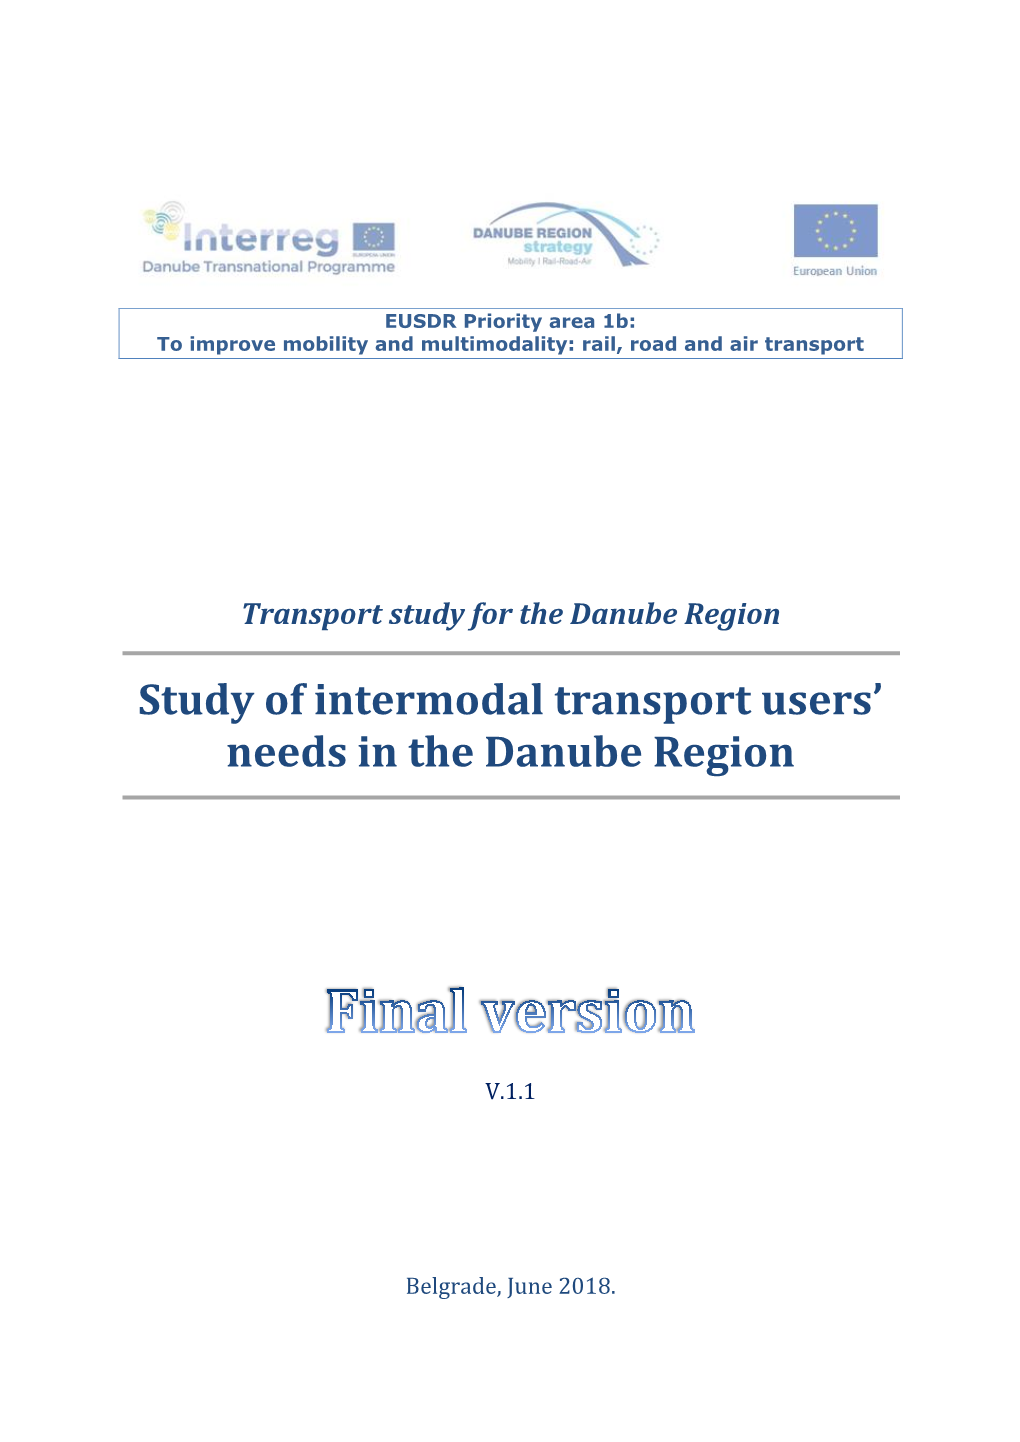 Study of Intermodal Transport Users' Needs in the Danube Region